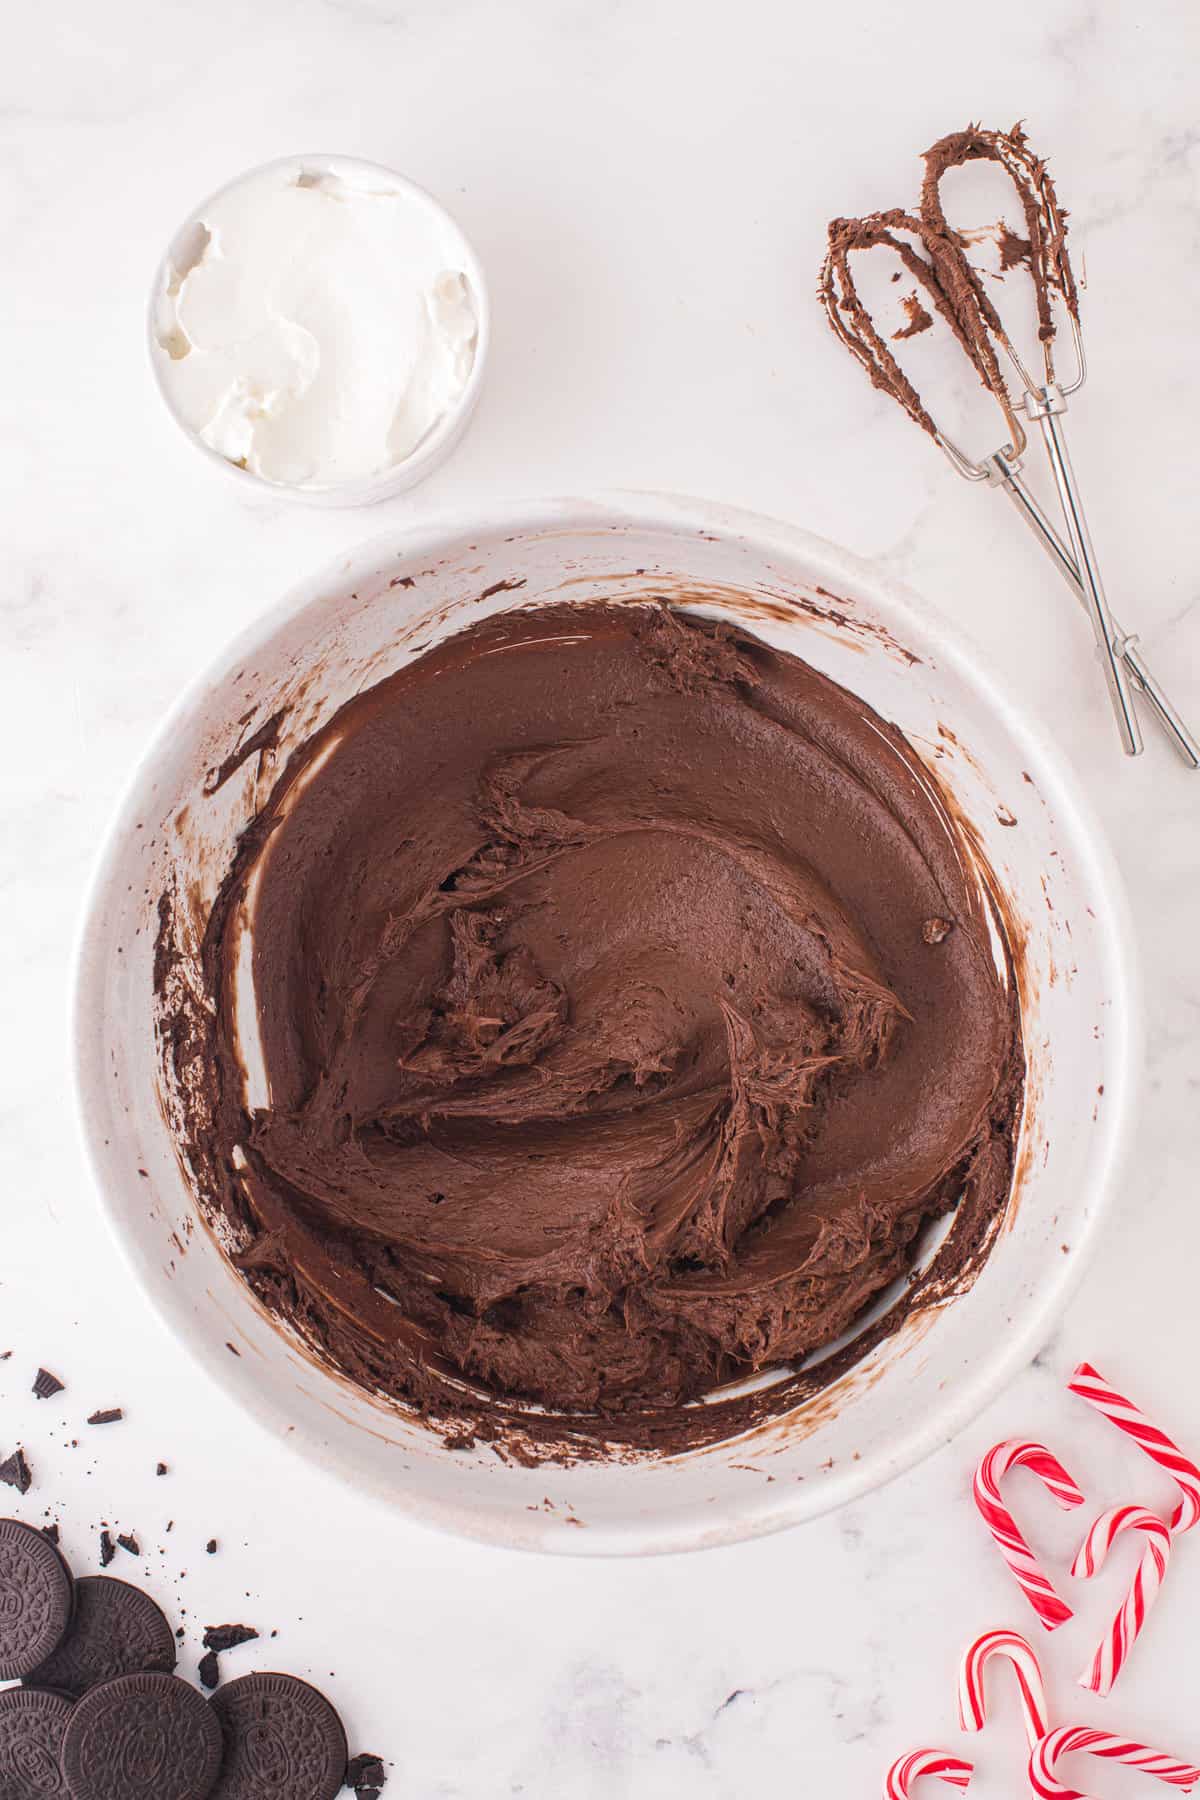 Chocolate cheesecake filling in bowl